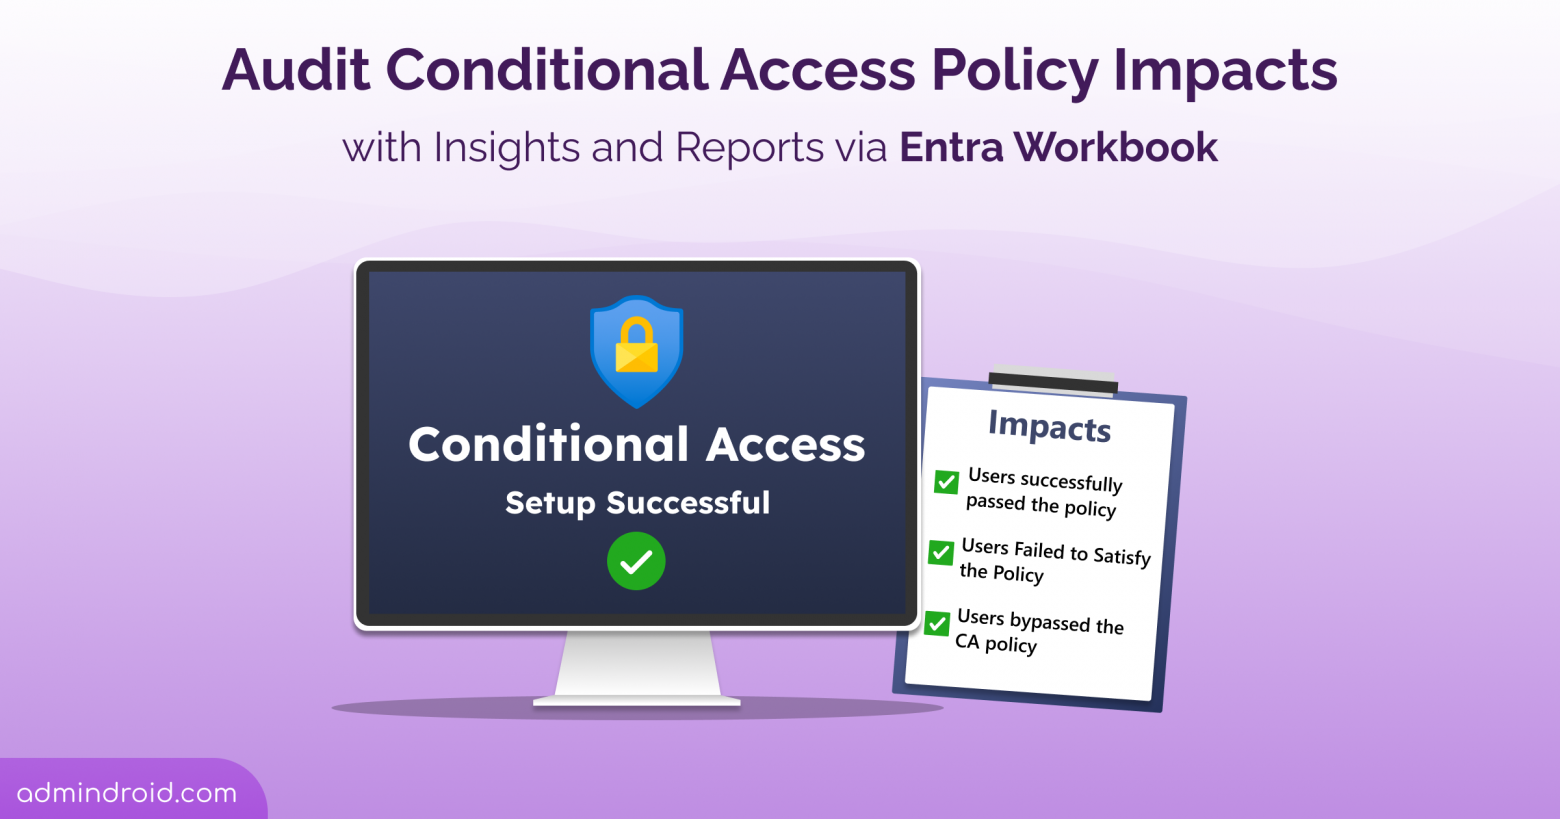 Audit Conditional Access Policy Impacts with Insights and Reports via Entra Workbook